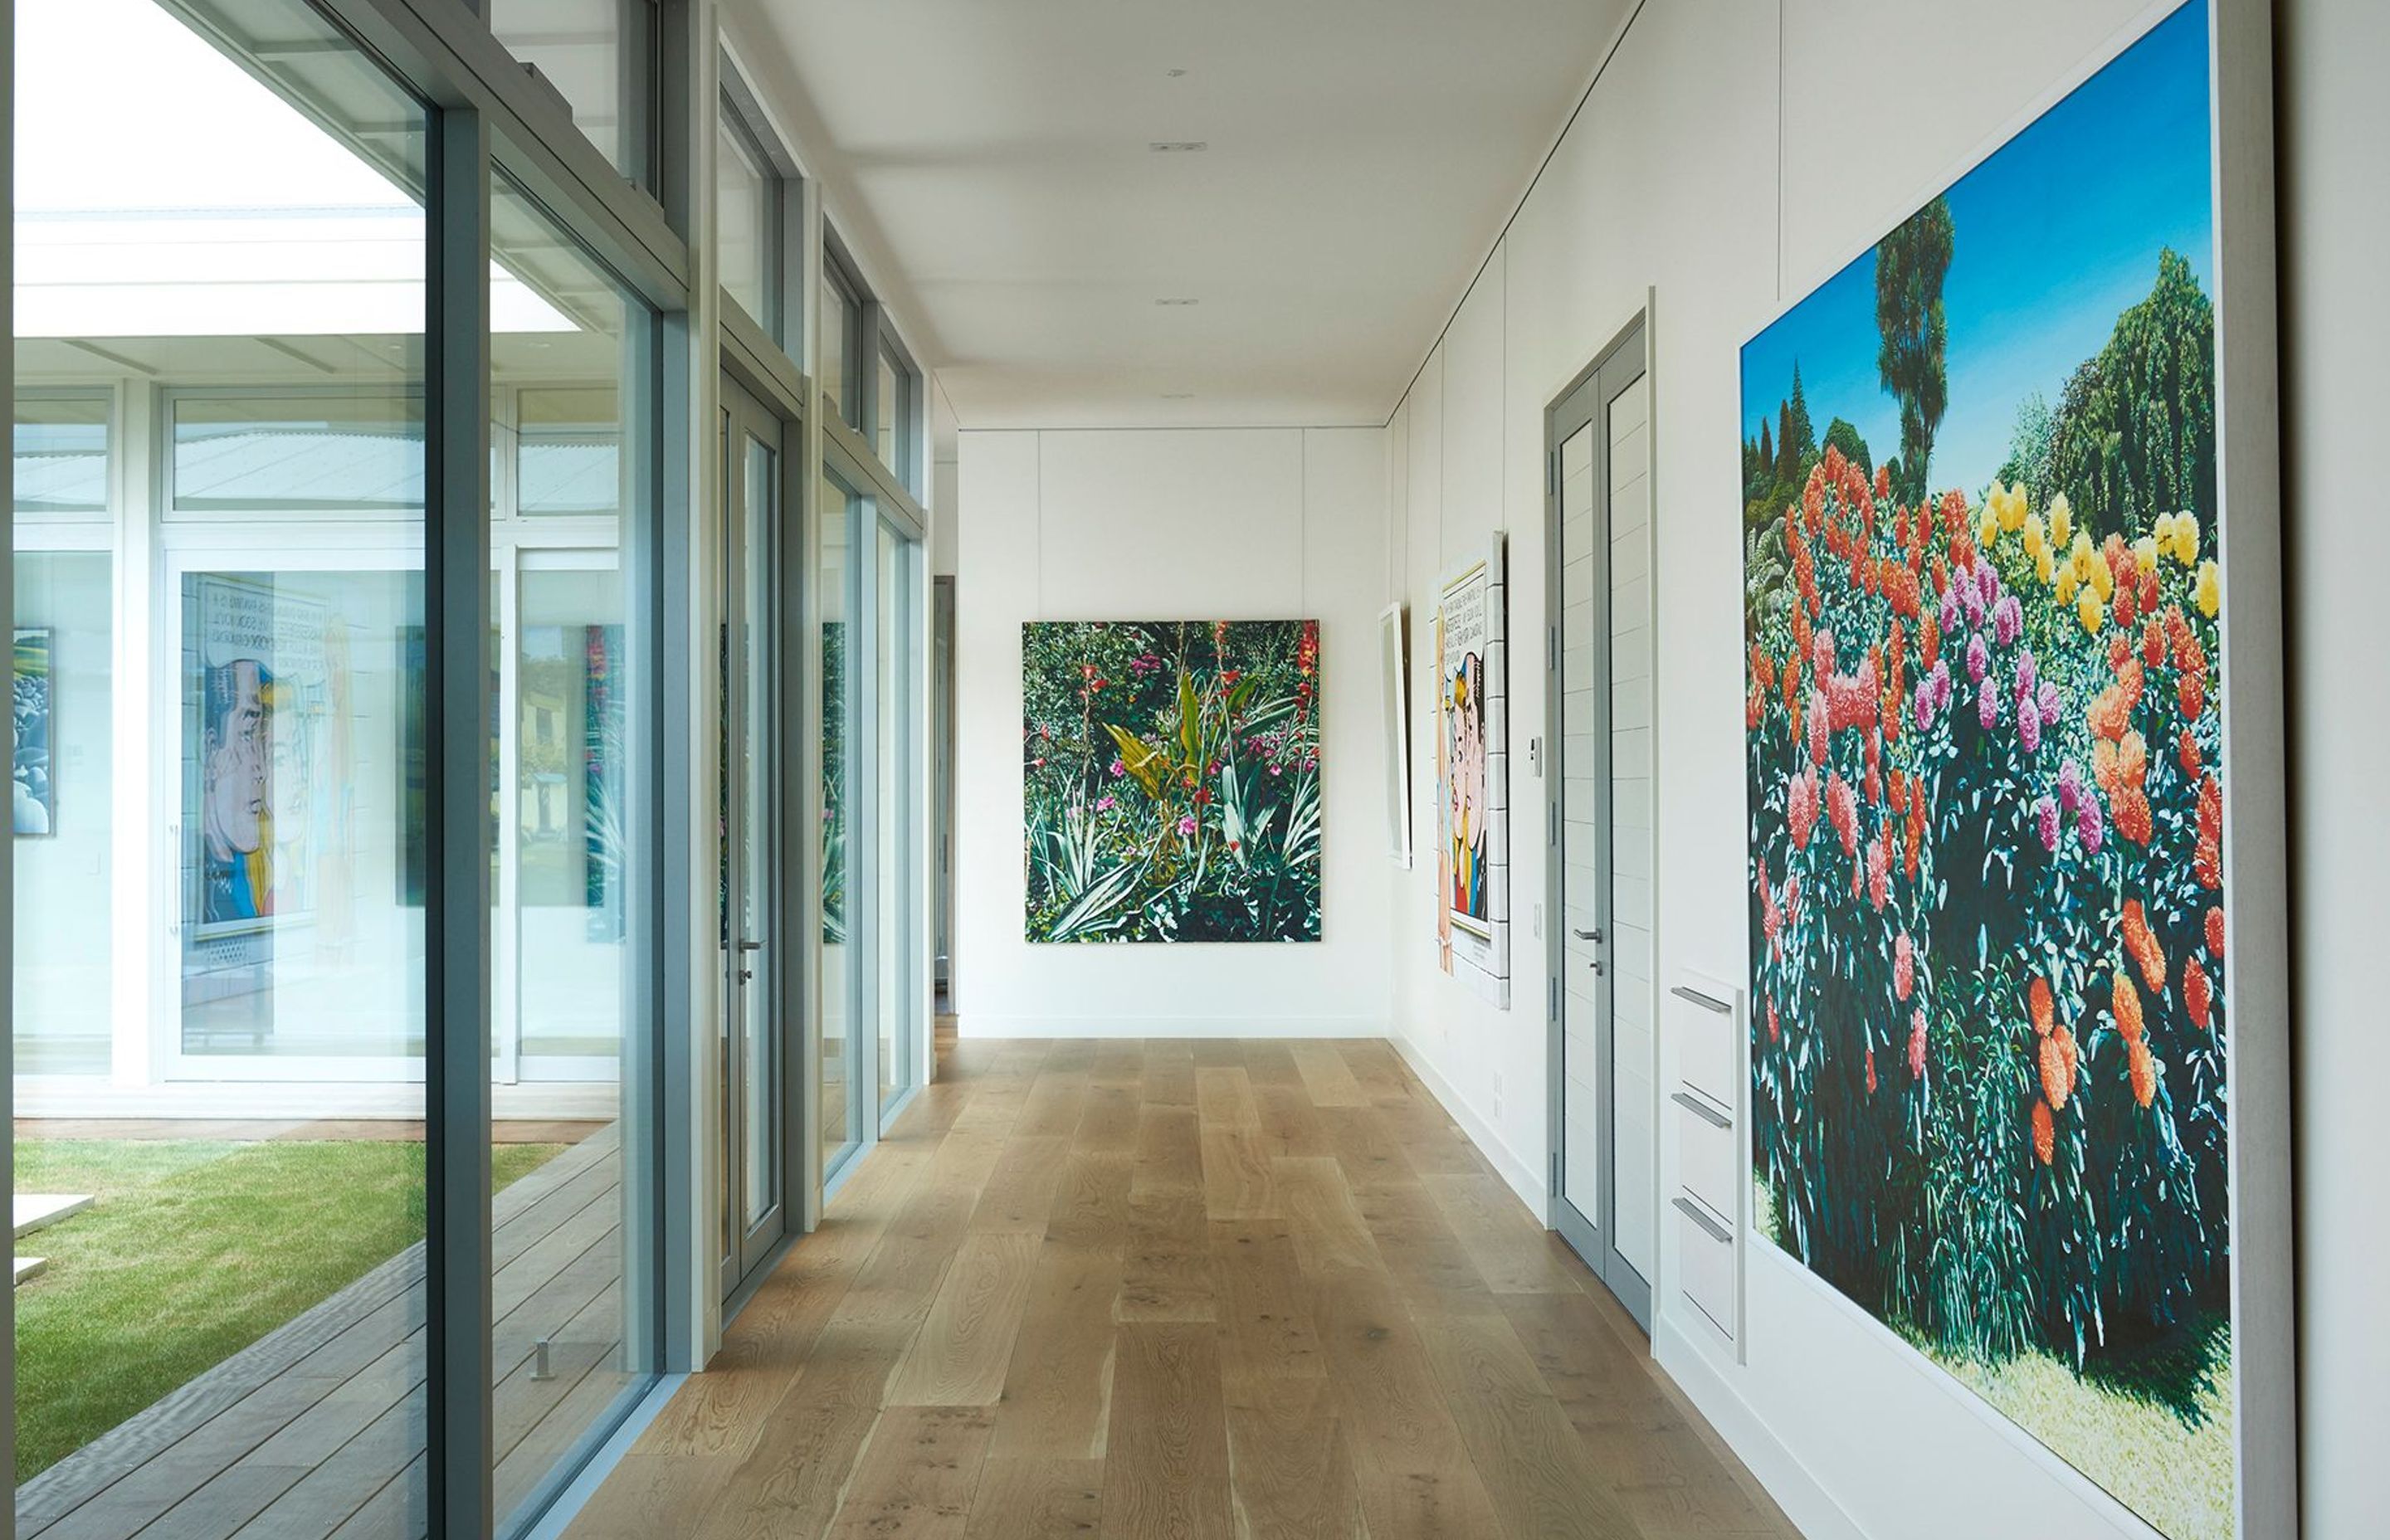 The corridor between the living and bedroom wings doubles as a gallery, featuring artworks by Nigel Brown, Karl Maughan, Stanley Palmer, and Ian Scott.